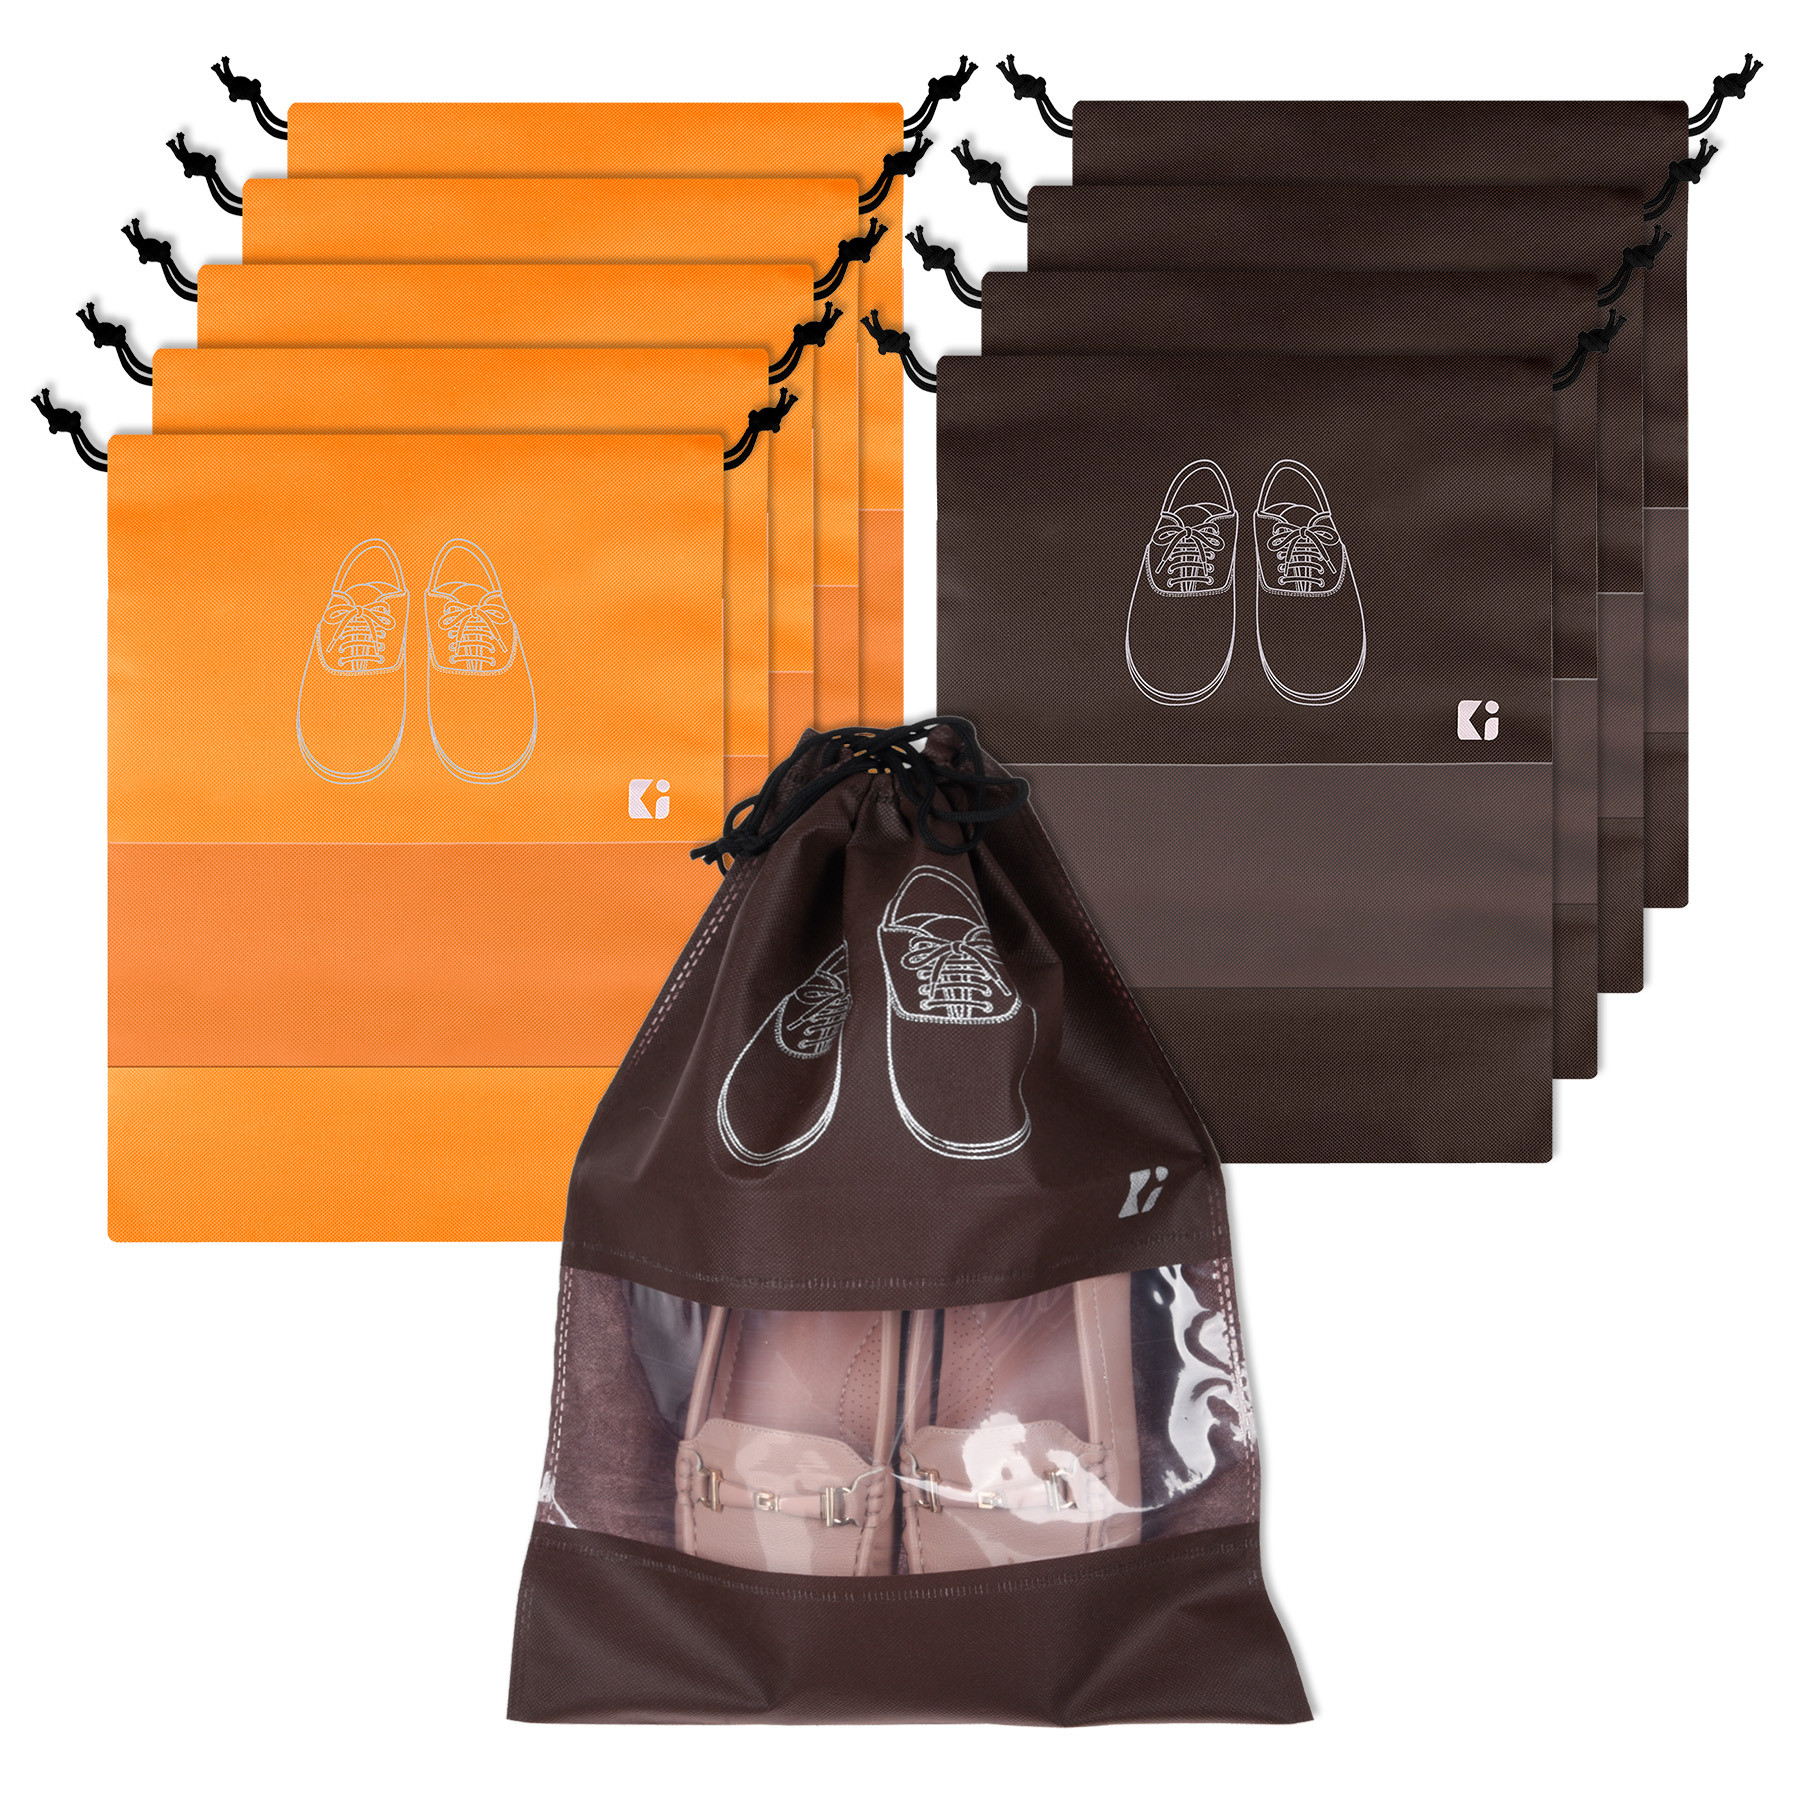 Kuber Industries Shoe Bags | Shoe Bags for Travel | Non-Woven Shoe Storage Bags | Storage Organizers Set | Shoe Cover with Transparent Window | Shoe Dori Cover | Orange & Coffee